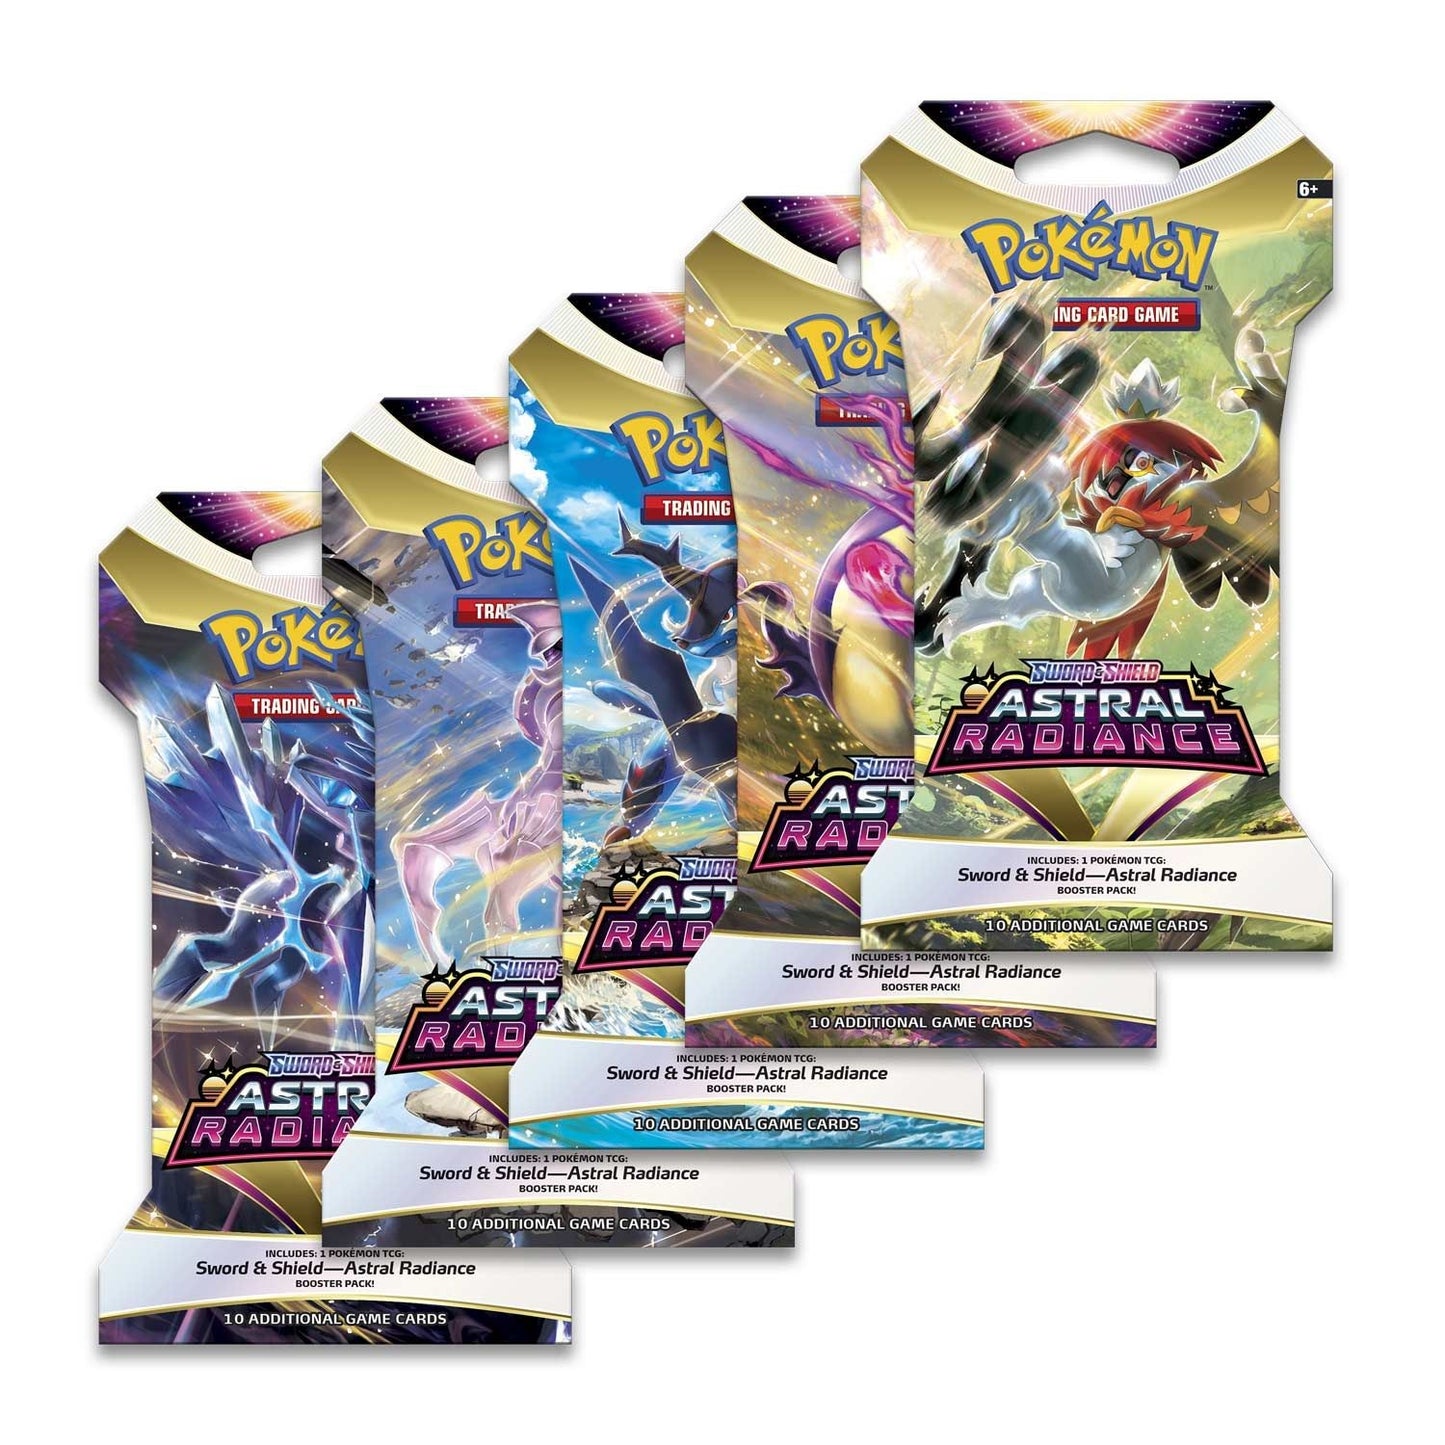 POKEMON TRADING CARD GAME: ASTRAL RADIANCE SLEEVED BOOSTER PACK